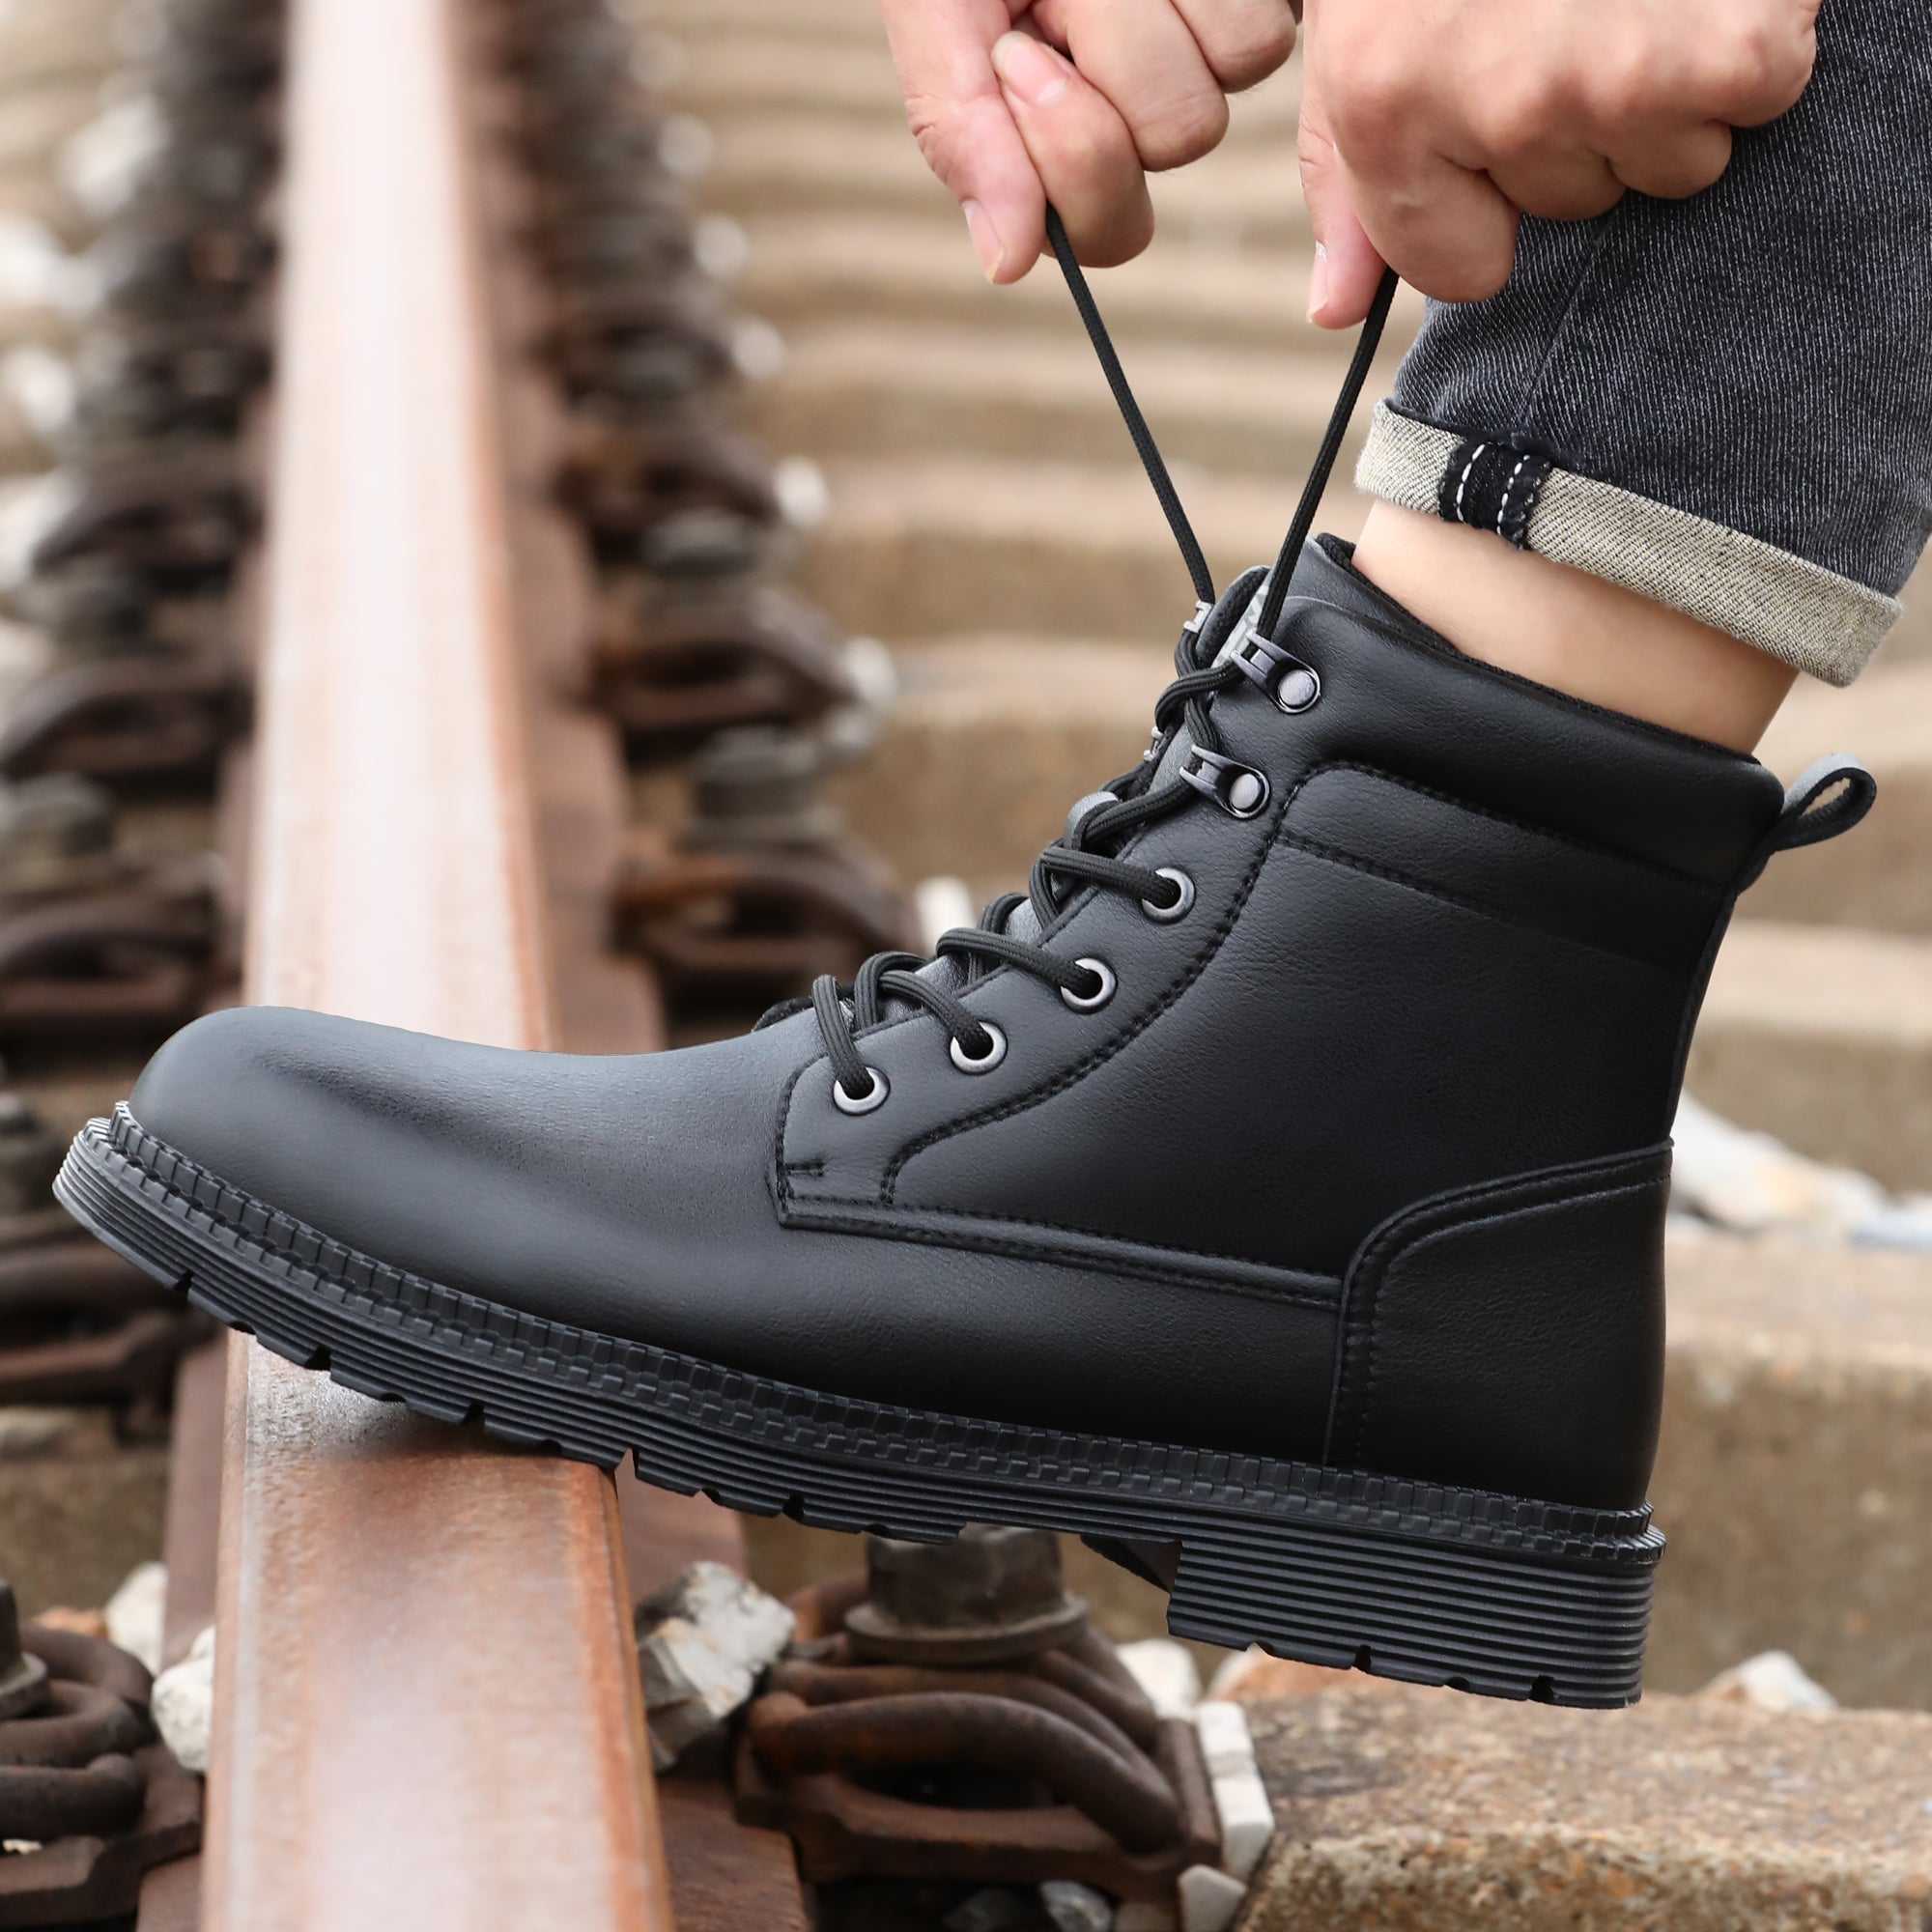 Panther Black PU Leather Safety Boot: Water-resistant, steel toe cap, and built for durability. Your long-lasting choice for reliable safety